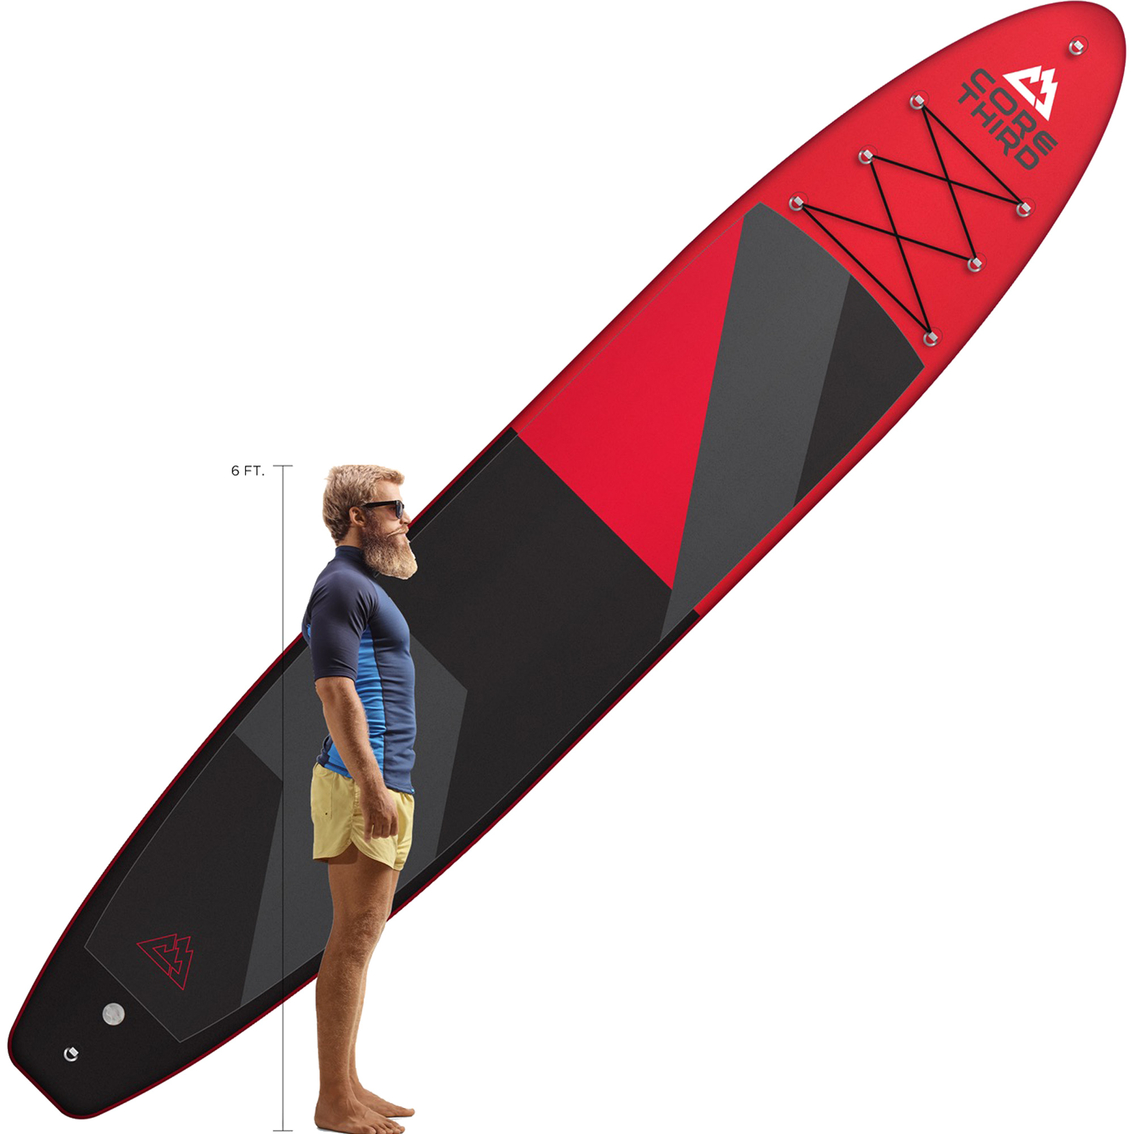 Core Third Tahoe Inflatable Paddle Board - Image 8 of 8